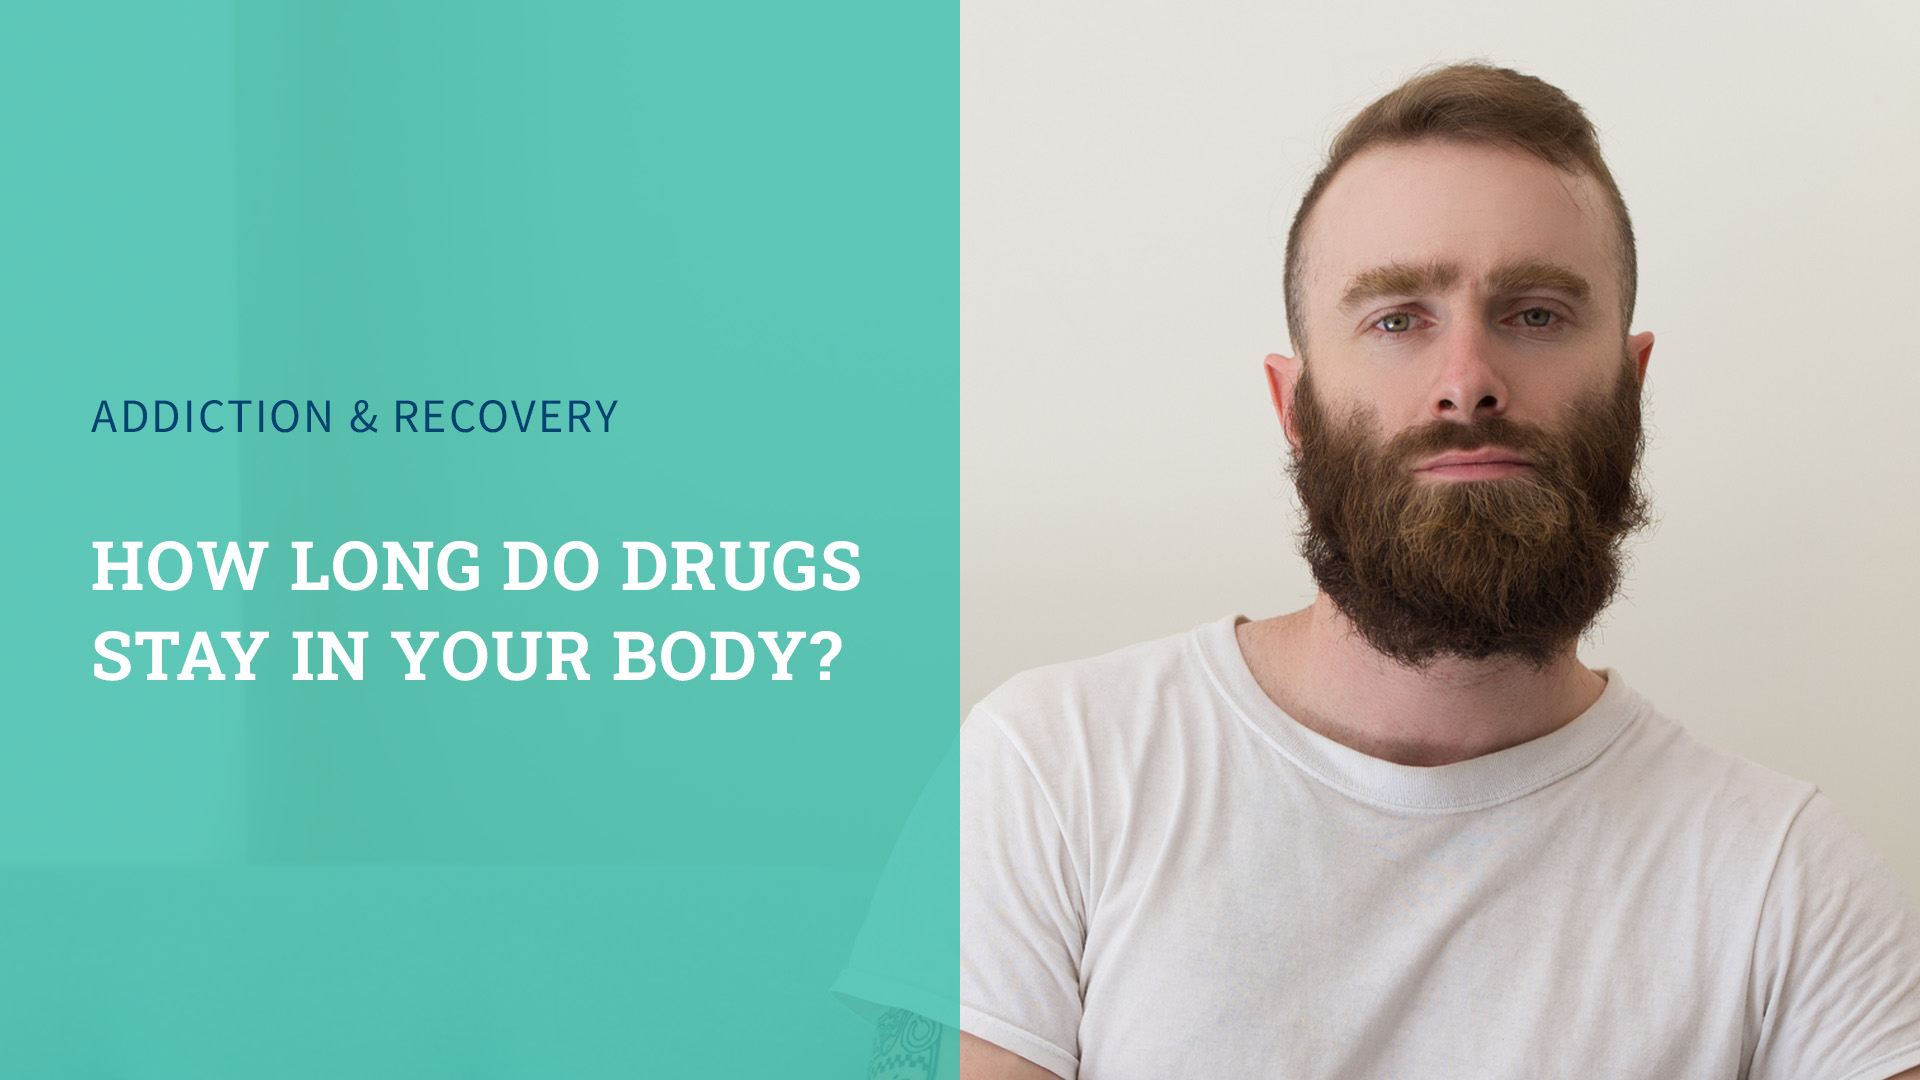 How Long Do Drugs Stay in Your Body?